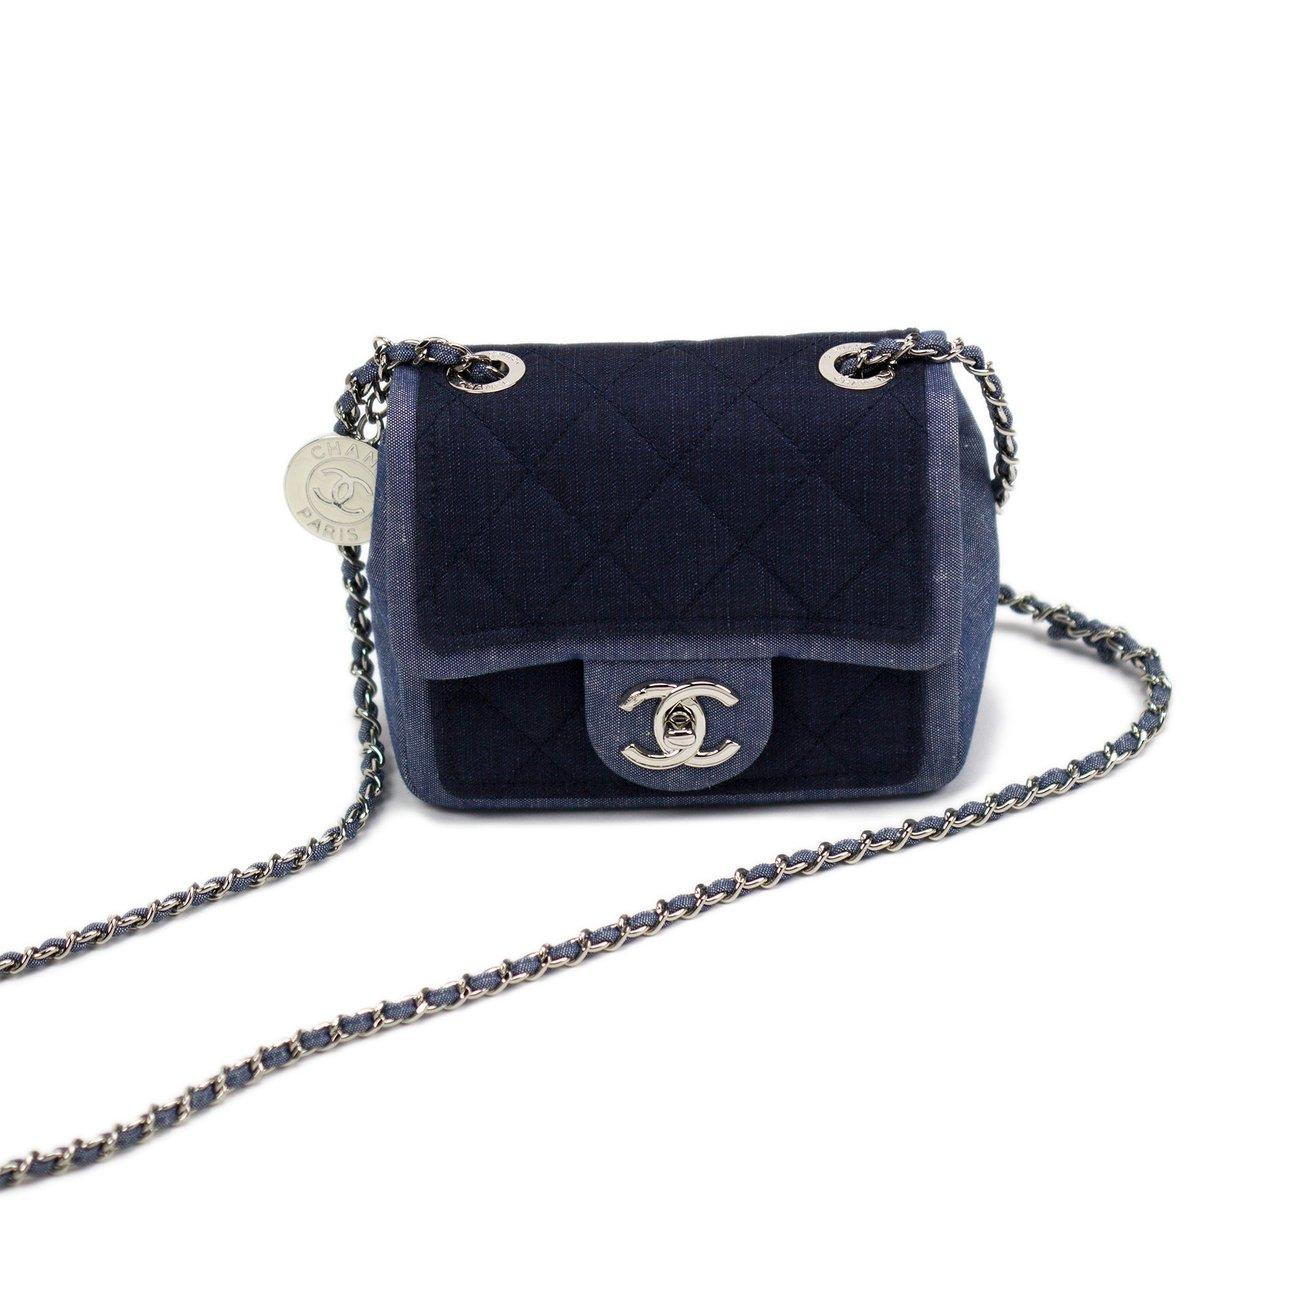 Small denim jean two tone Chanel medallion mini crossbody shoulder classic flap

Year: 2014
Interwoven classic chain with metal CC coin detail
Silver hardware
Denim lined interior
Interior center pocket
Additional front pocket
Dimensions: 5.25